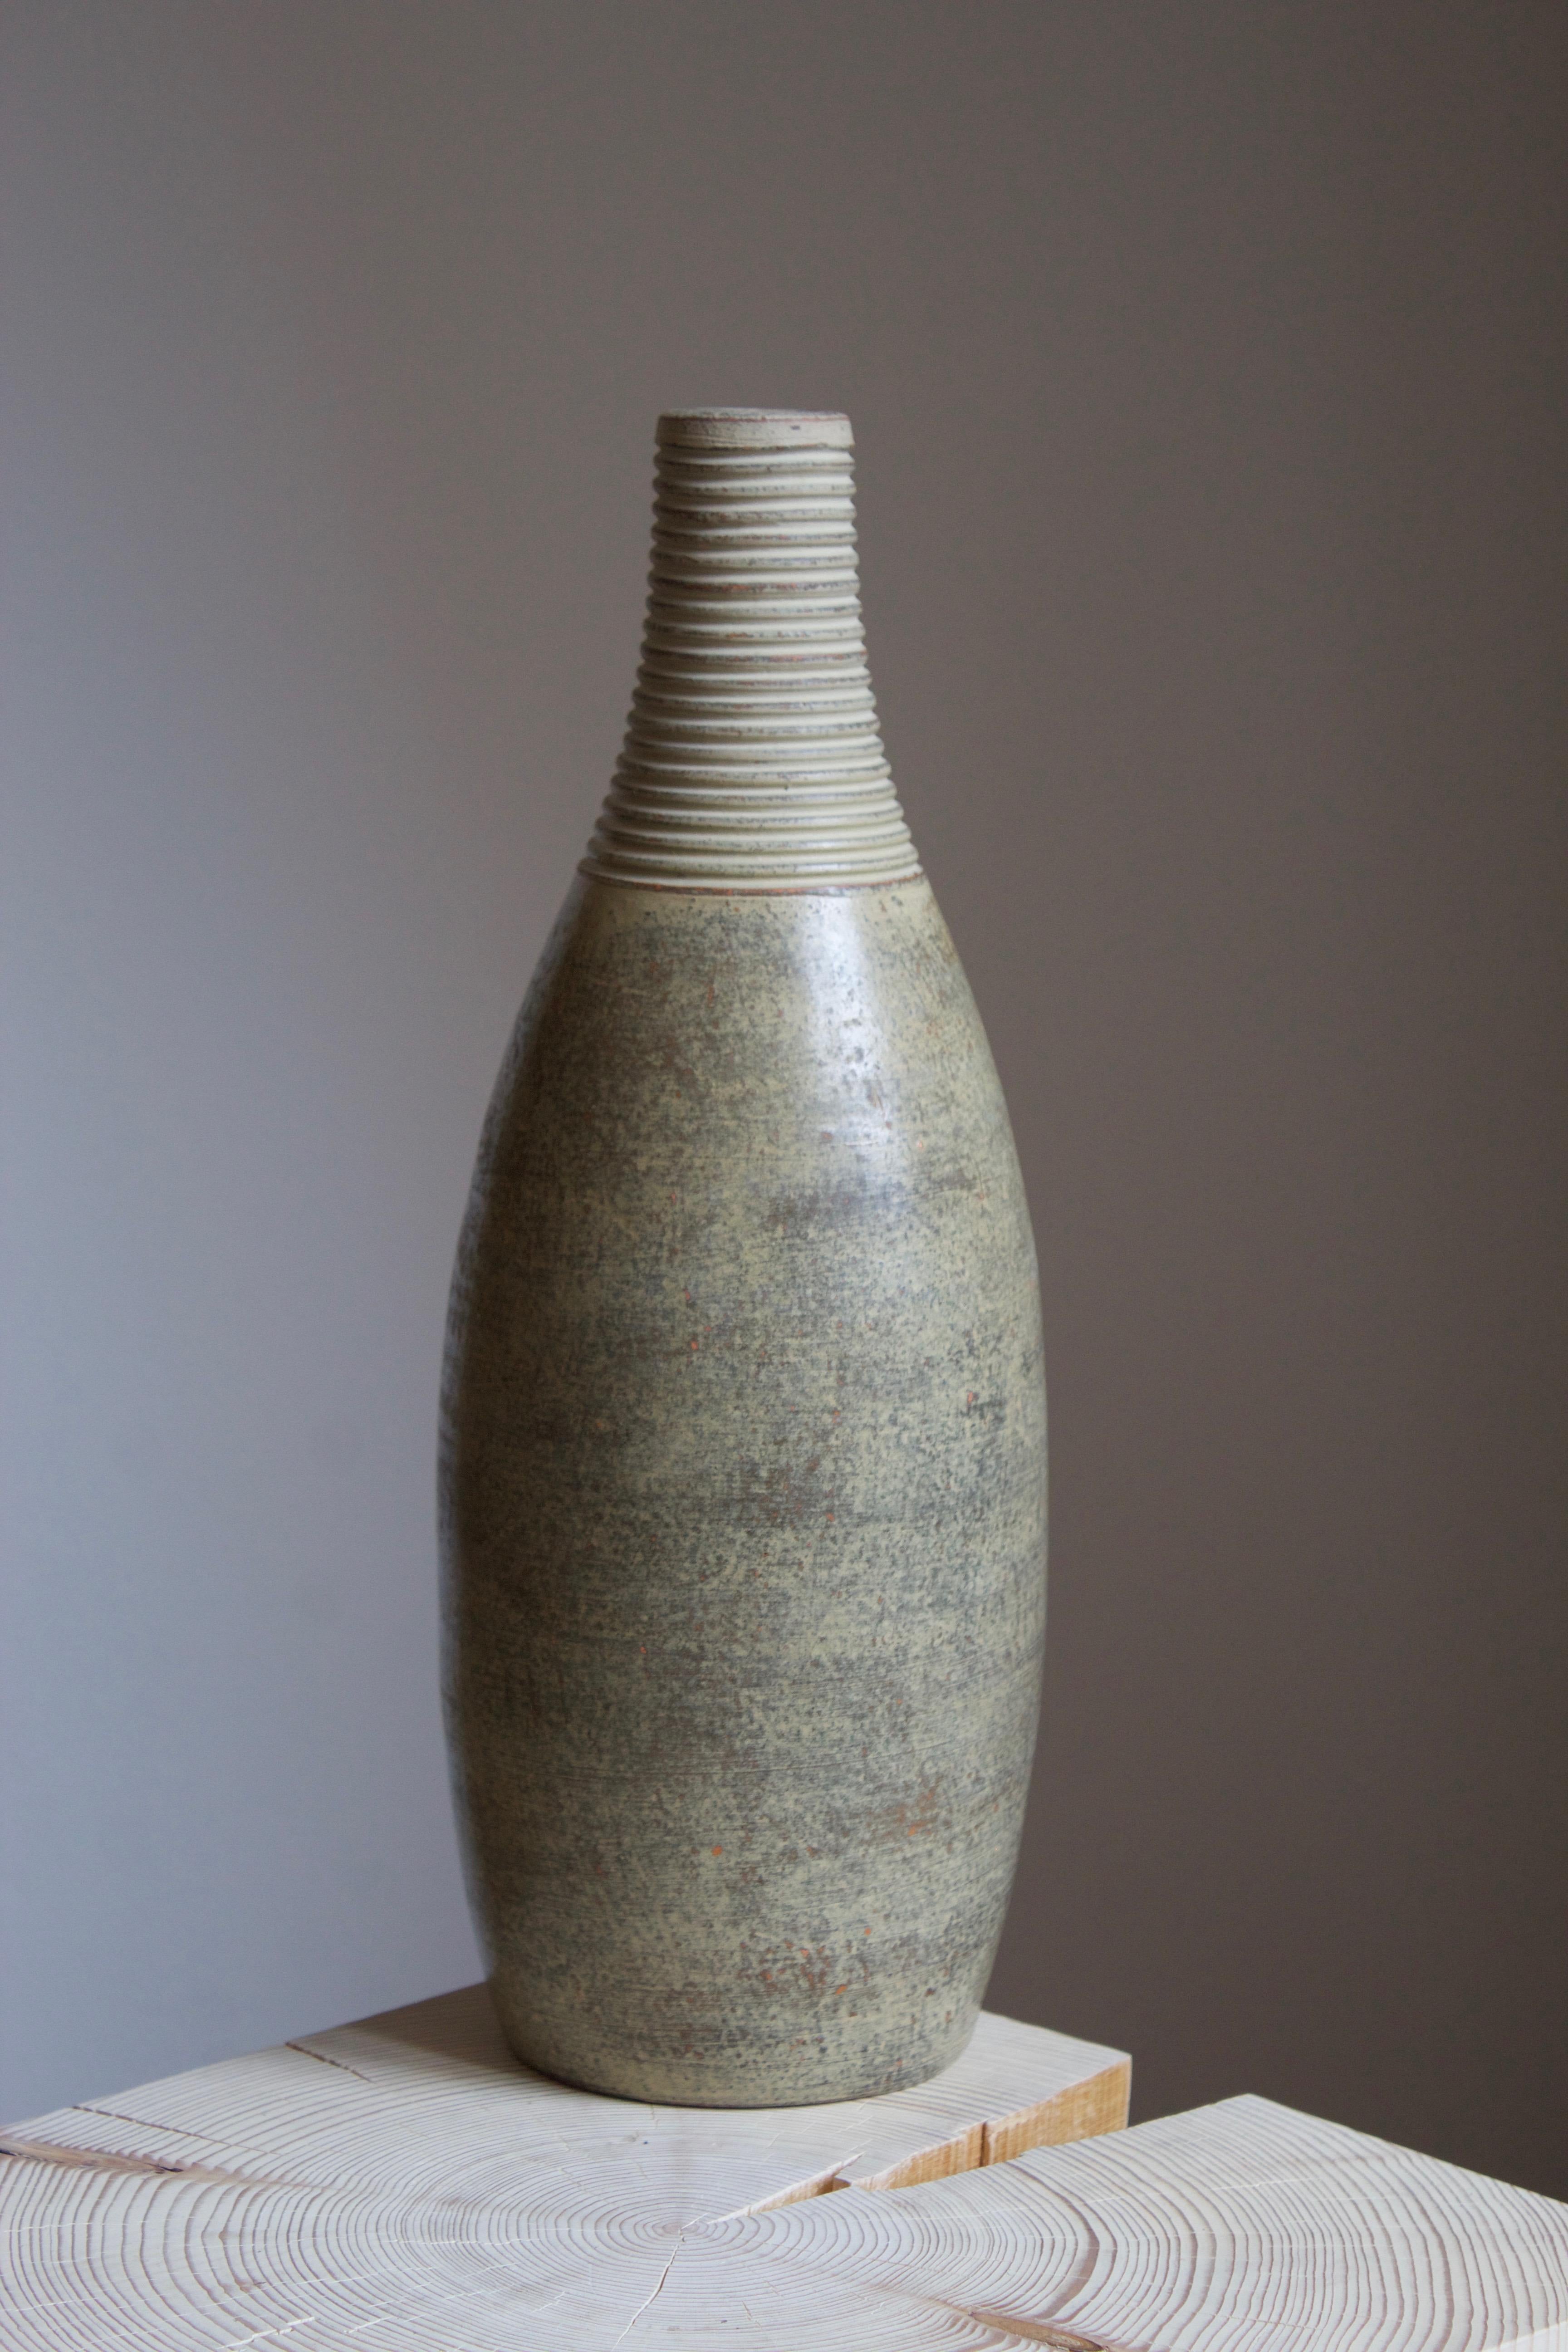 A vase, production attributed to Höganäs Keramik. Stamp unidentified, likely model number. Sourced in collection of ceramics by Höganäs.
 